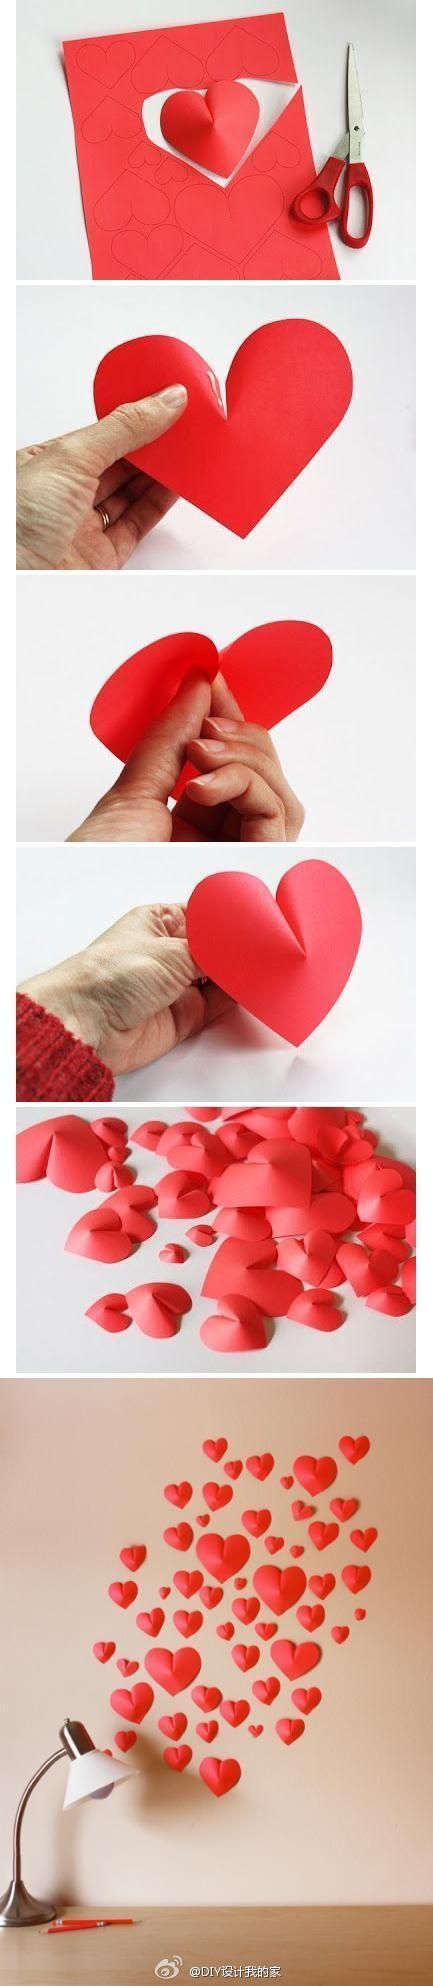 DIY Make a 3D Paper Heart for cute decorations- Usse them as confetti or hang th